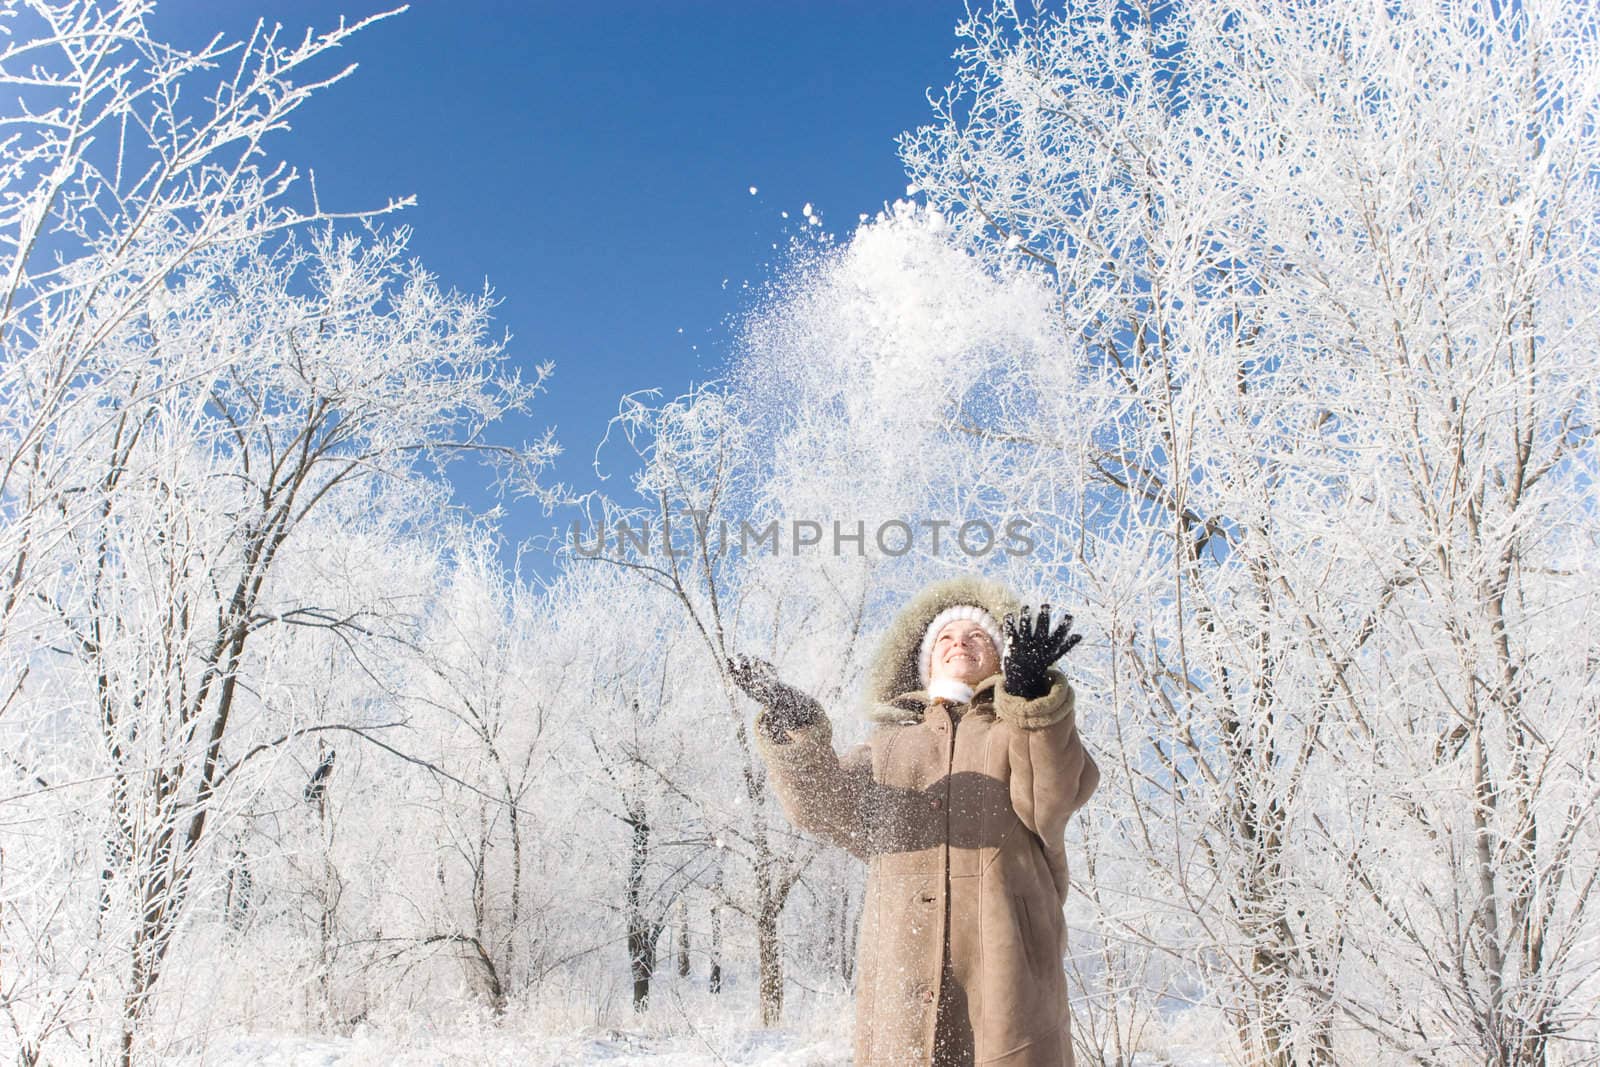 a girl throwing up snow in the winter forest